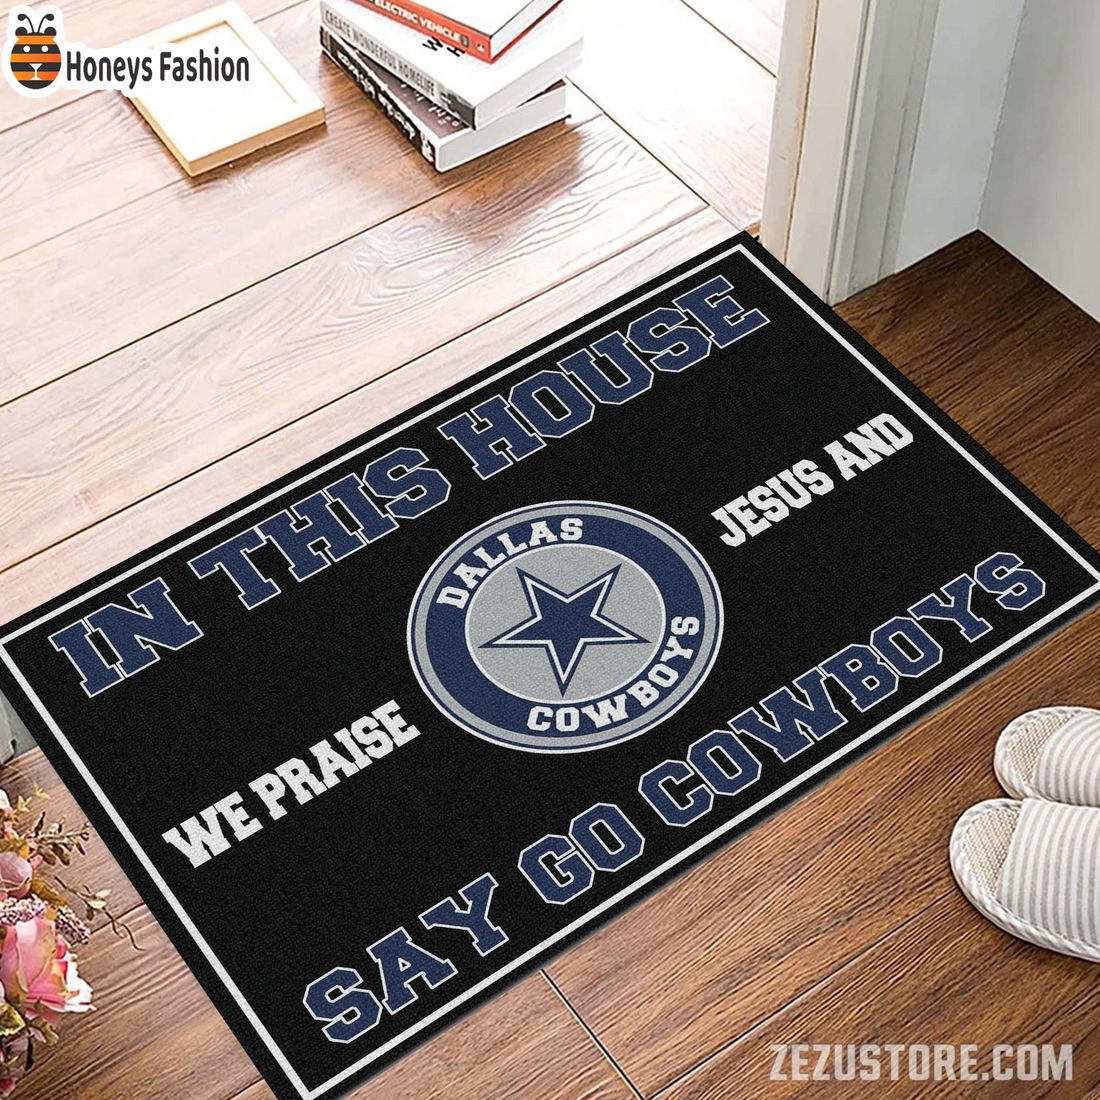 In this house we praise jesus and say go Cowboys doormat